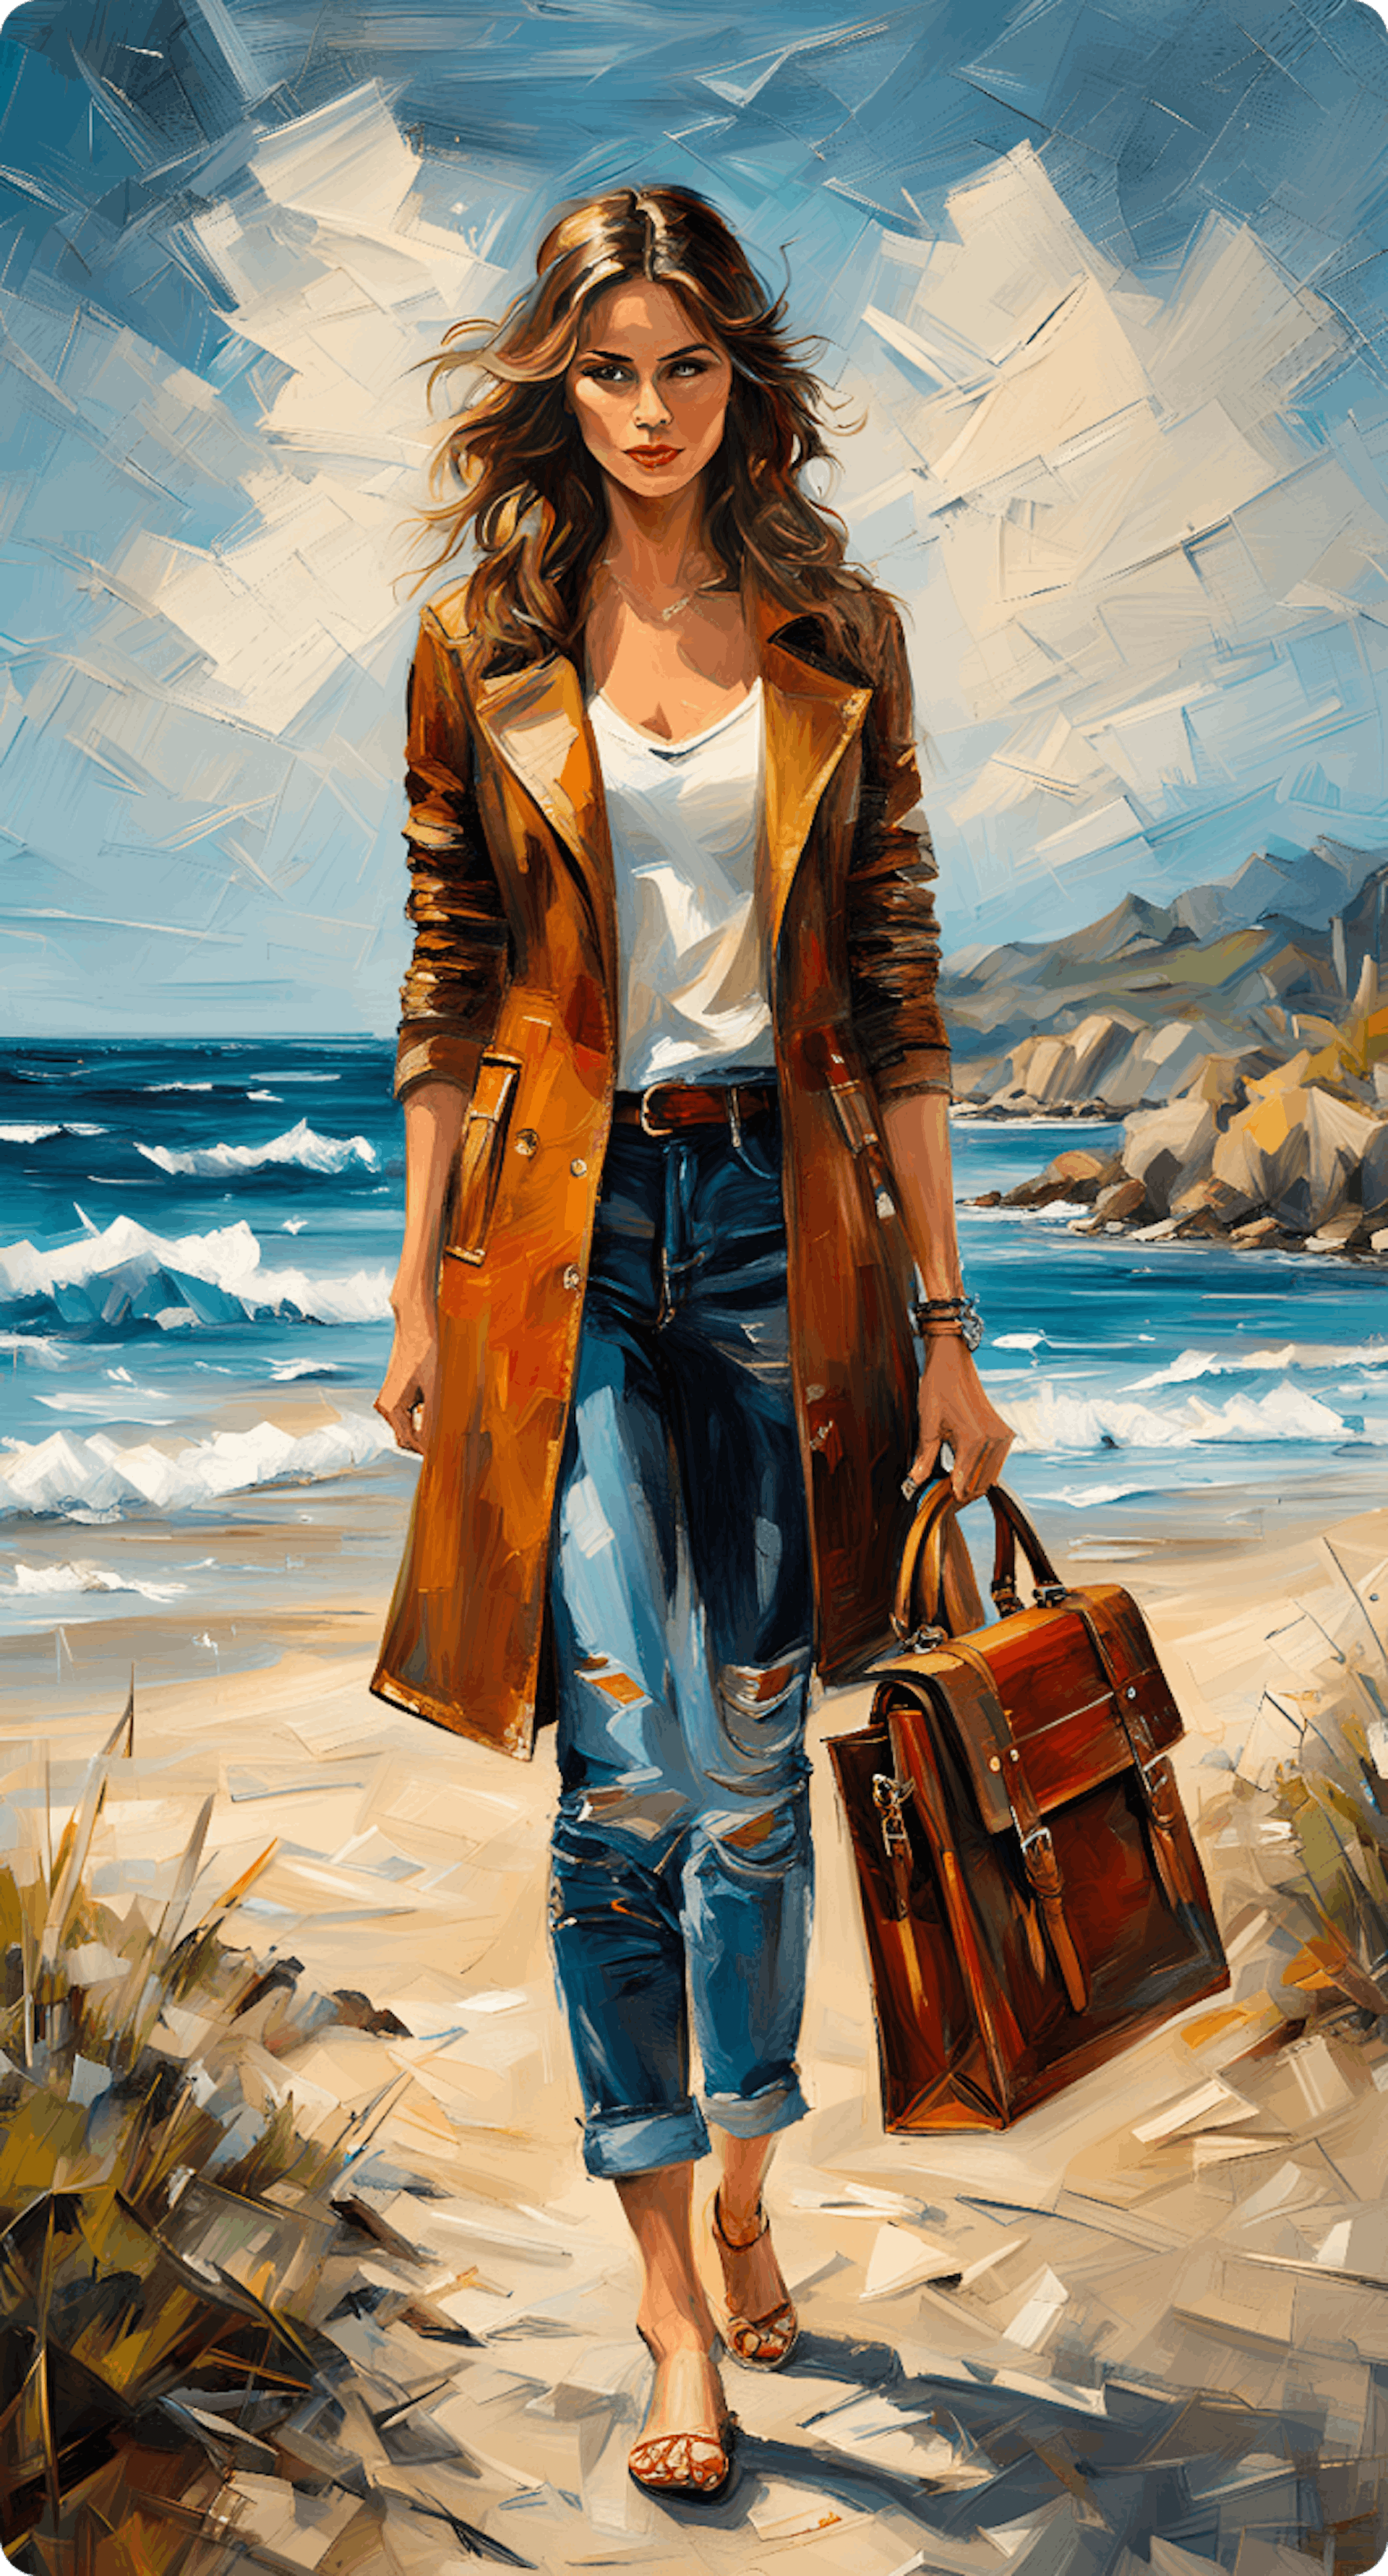 Painterly illustration of a woman at the beach